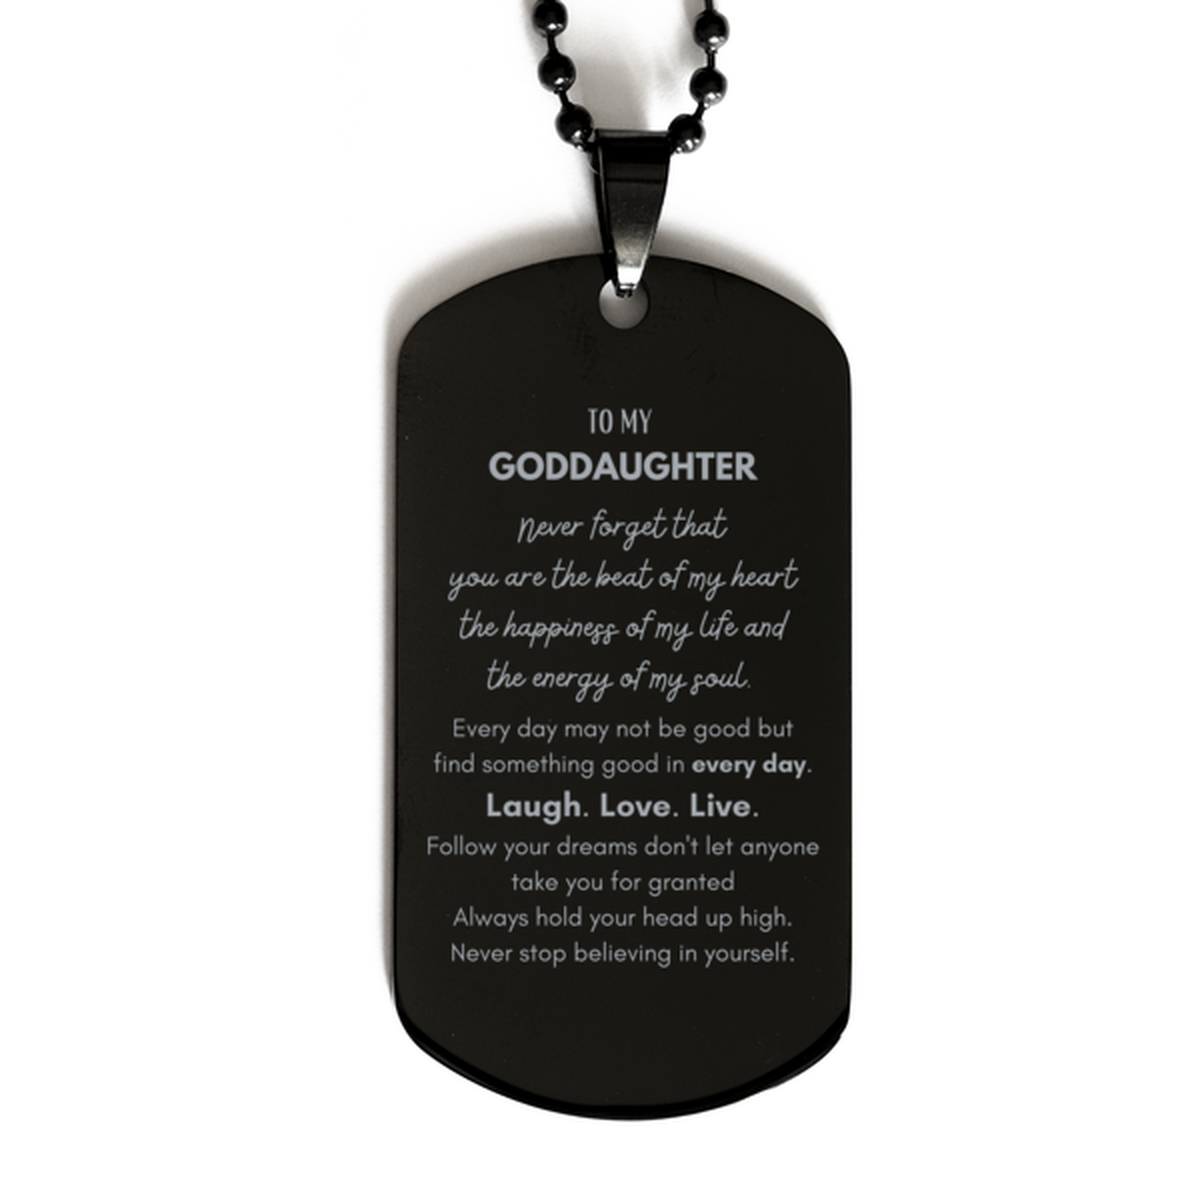 To My Goddaughter Dogtag Gifts, Christmas Goddaughter Black Dog Tag Present, Birthday Unique Motivational For Goddaughter, To My Goddaughter Never forget that you are the beat of my heart the happiness of my life and the energy of my soul